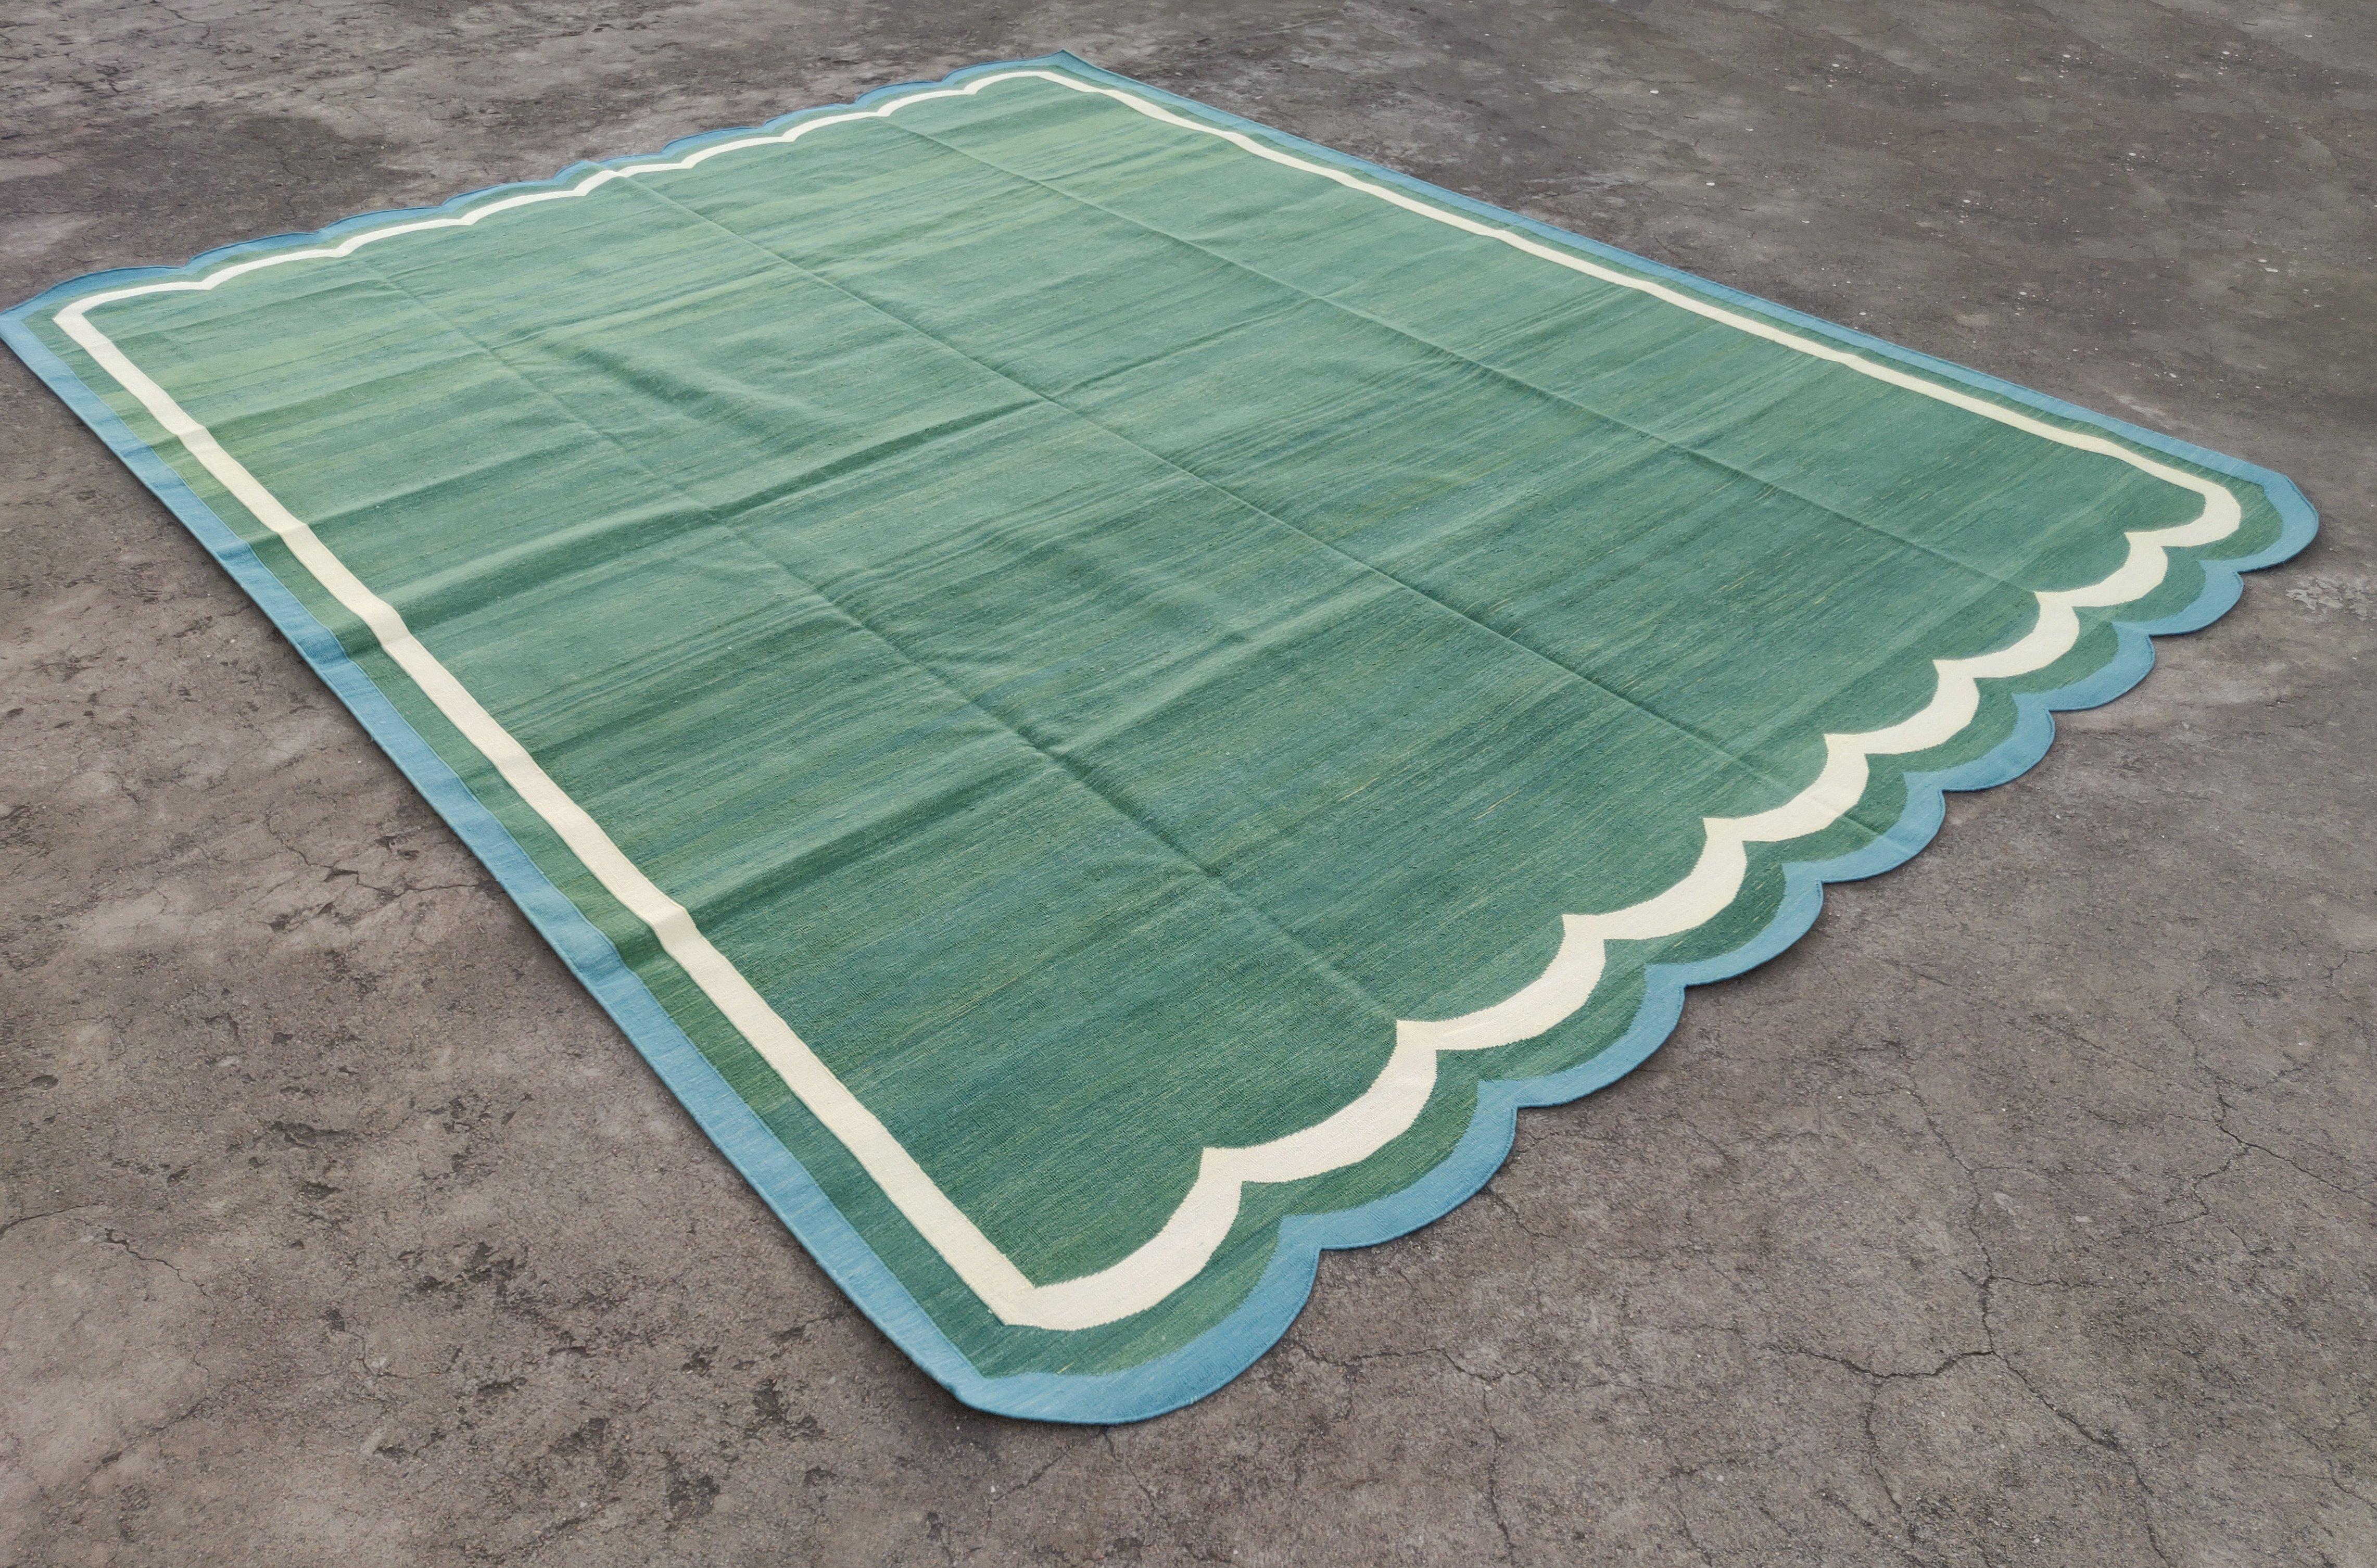 Cotton Vegetable Dyed Forest Green, Cream And Teal Blue Two Sided Scalloped Rug-9'x12' 
(Scallops runs on all 9 Feet Sides)
These special flat-weave dhurries are hand-woven with 15 ply 100% cotton yarn. Due to the special manufacturing techniques